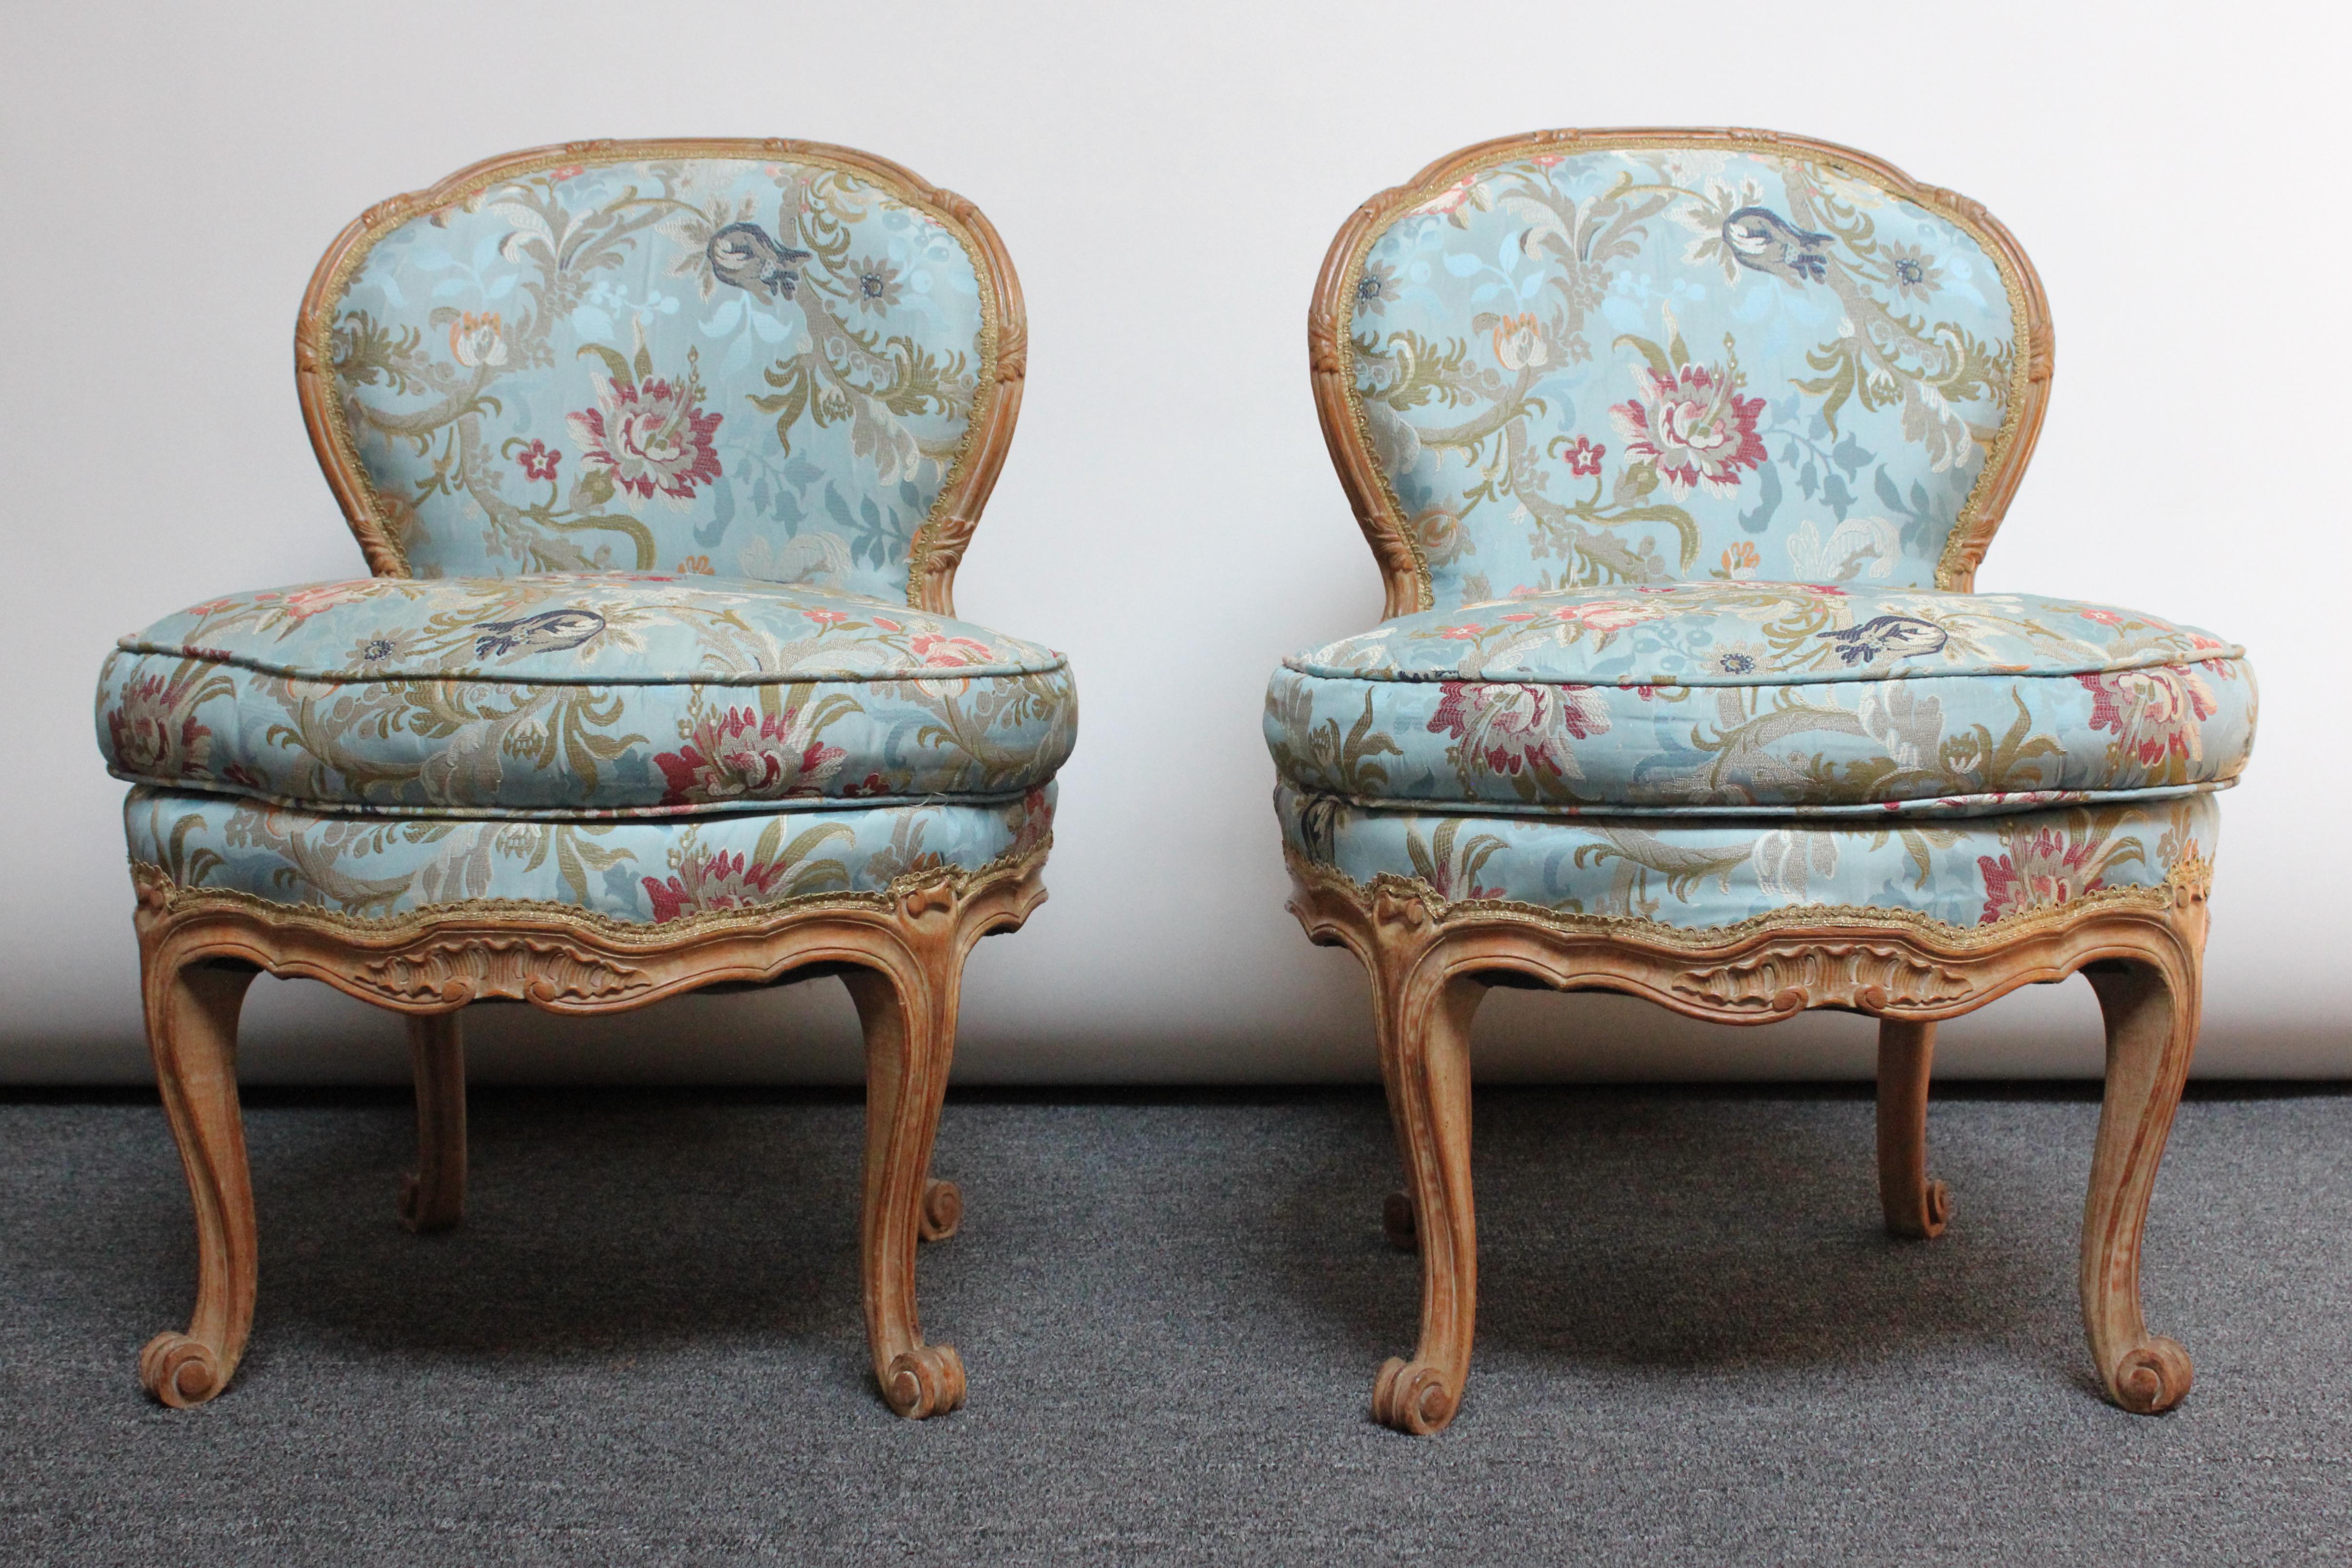 Petite Louis XV-style boudoir / vanity chairs with carved oak frames and scroll cabriole legs (ca. 1900, France). Features carved acanthus and leaf motif throughout. 
Floral silk upholstery is a later addition (likely 1930s-1940s) and shows light